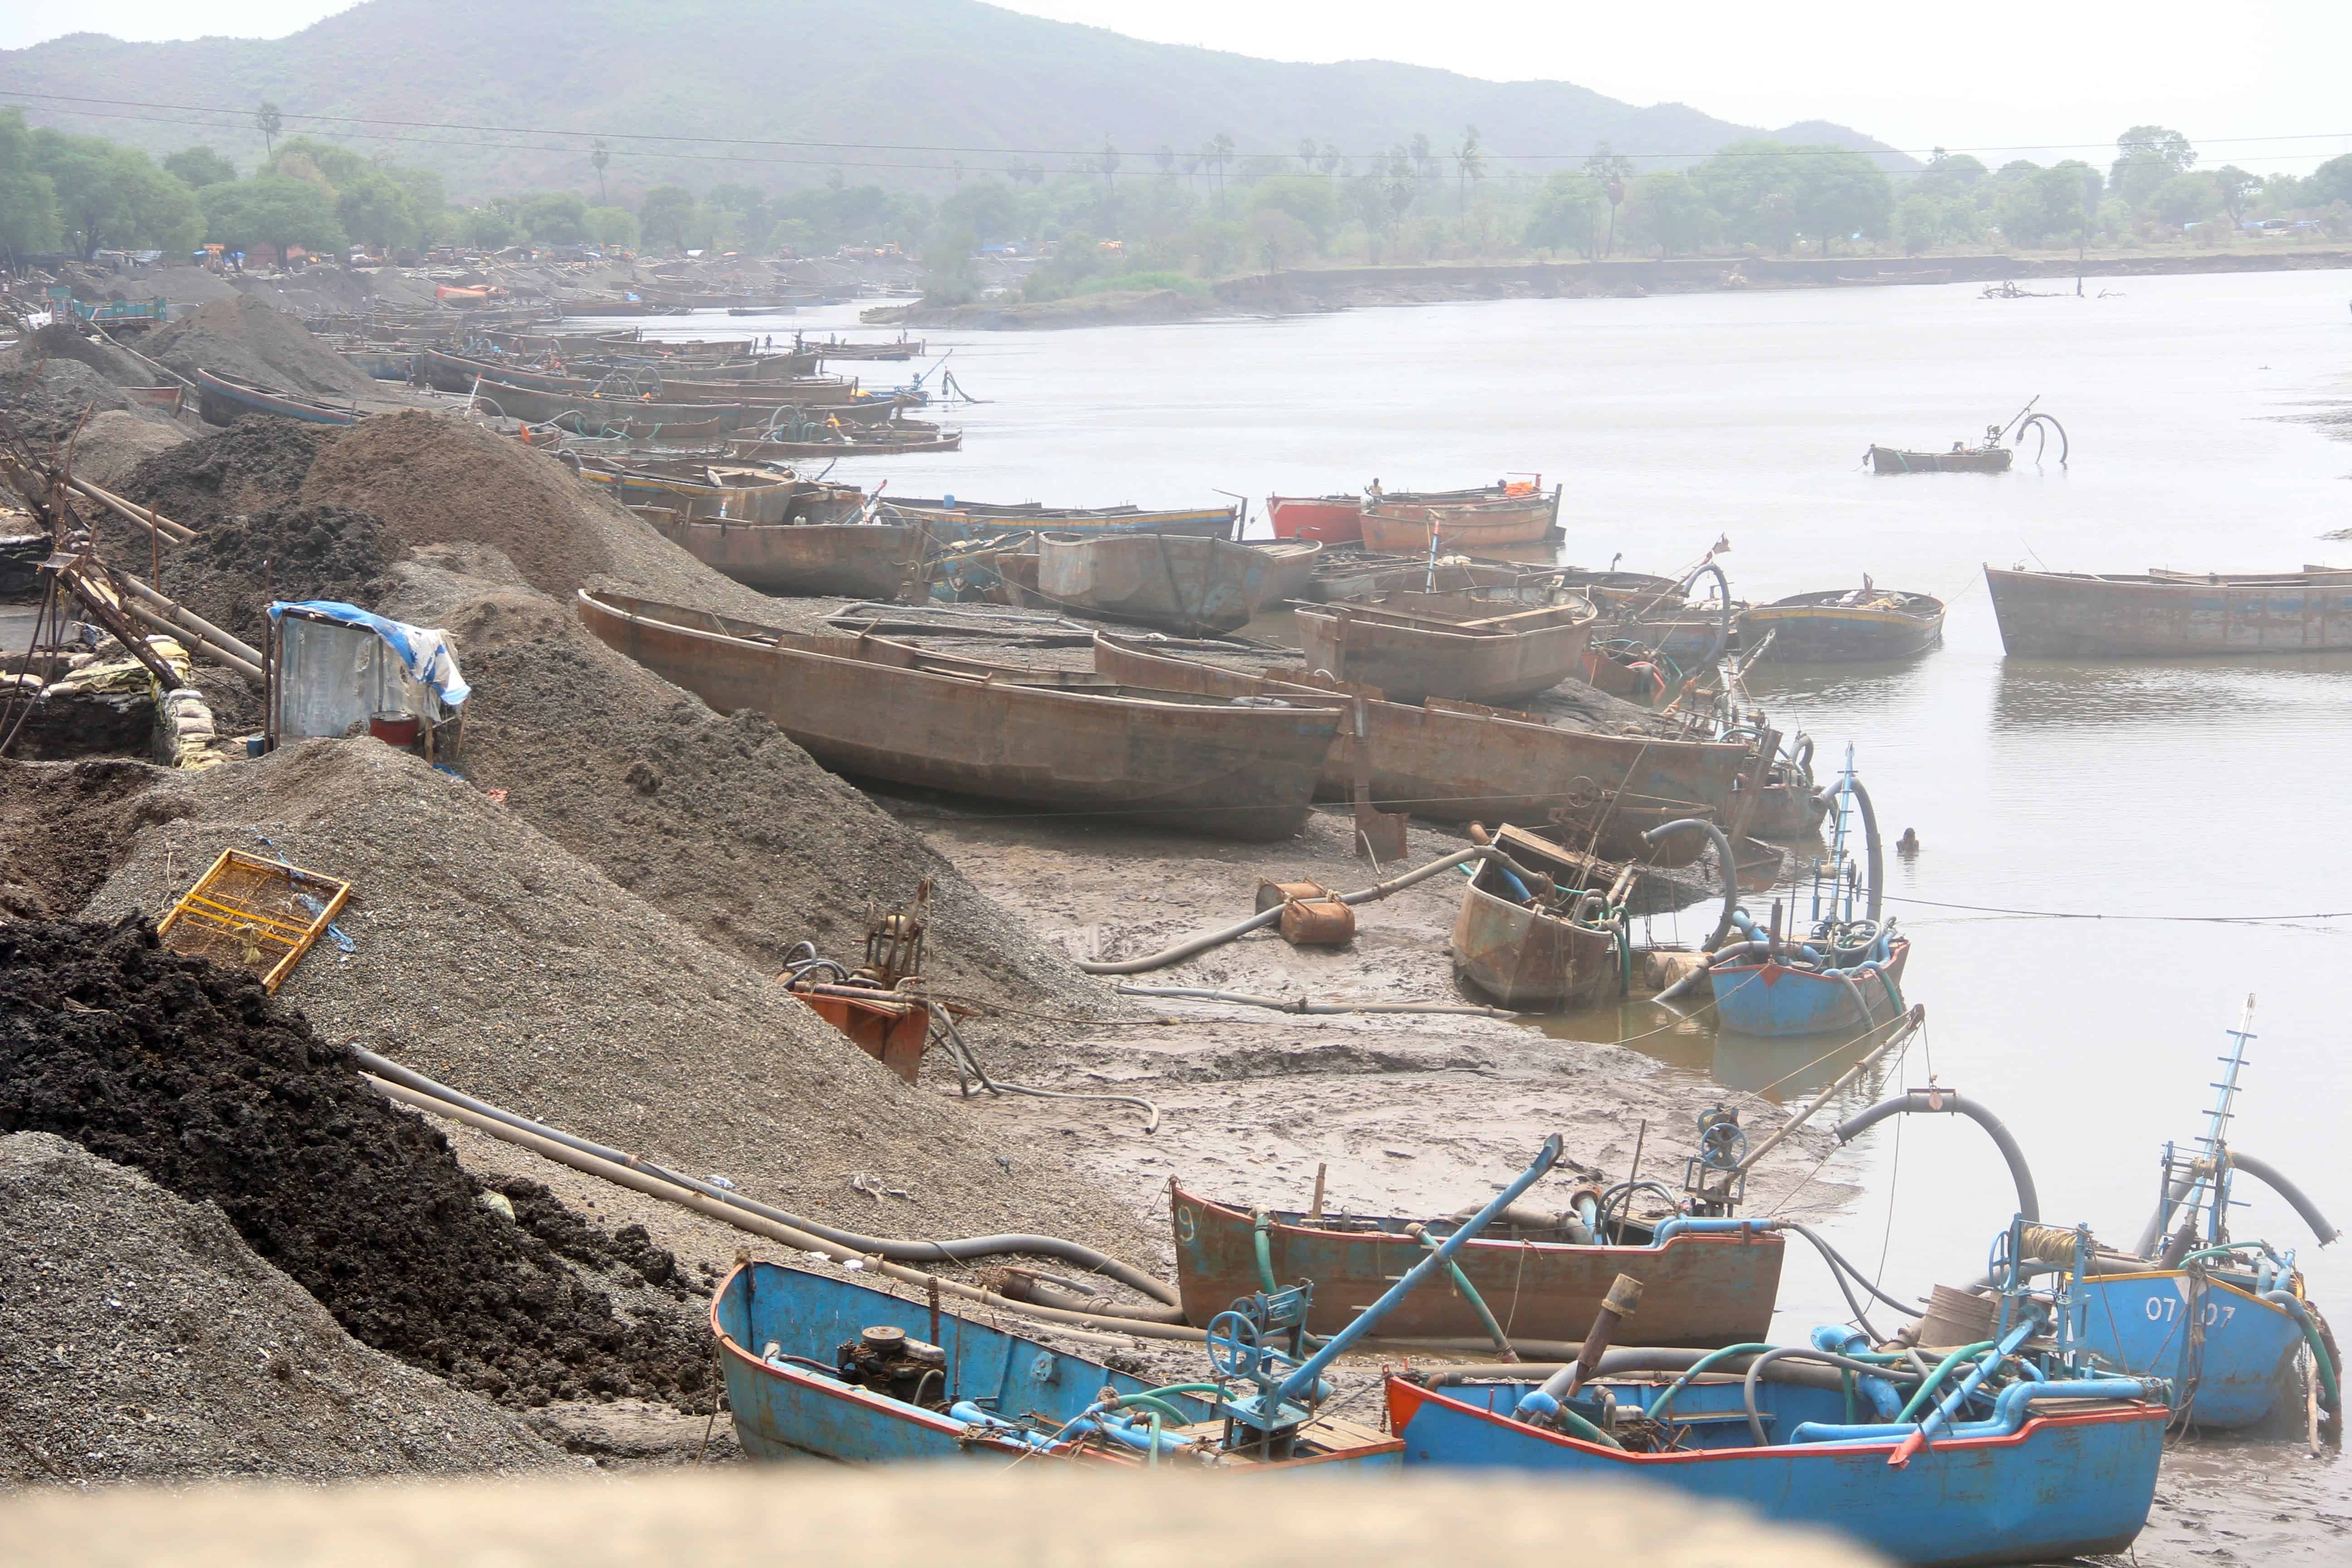 Sand mining at the side of a river using efficient suction pumps. Image credits: Sumaira Abdulali.